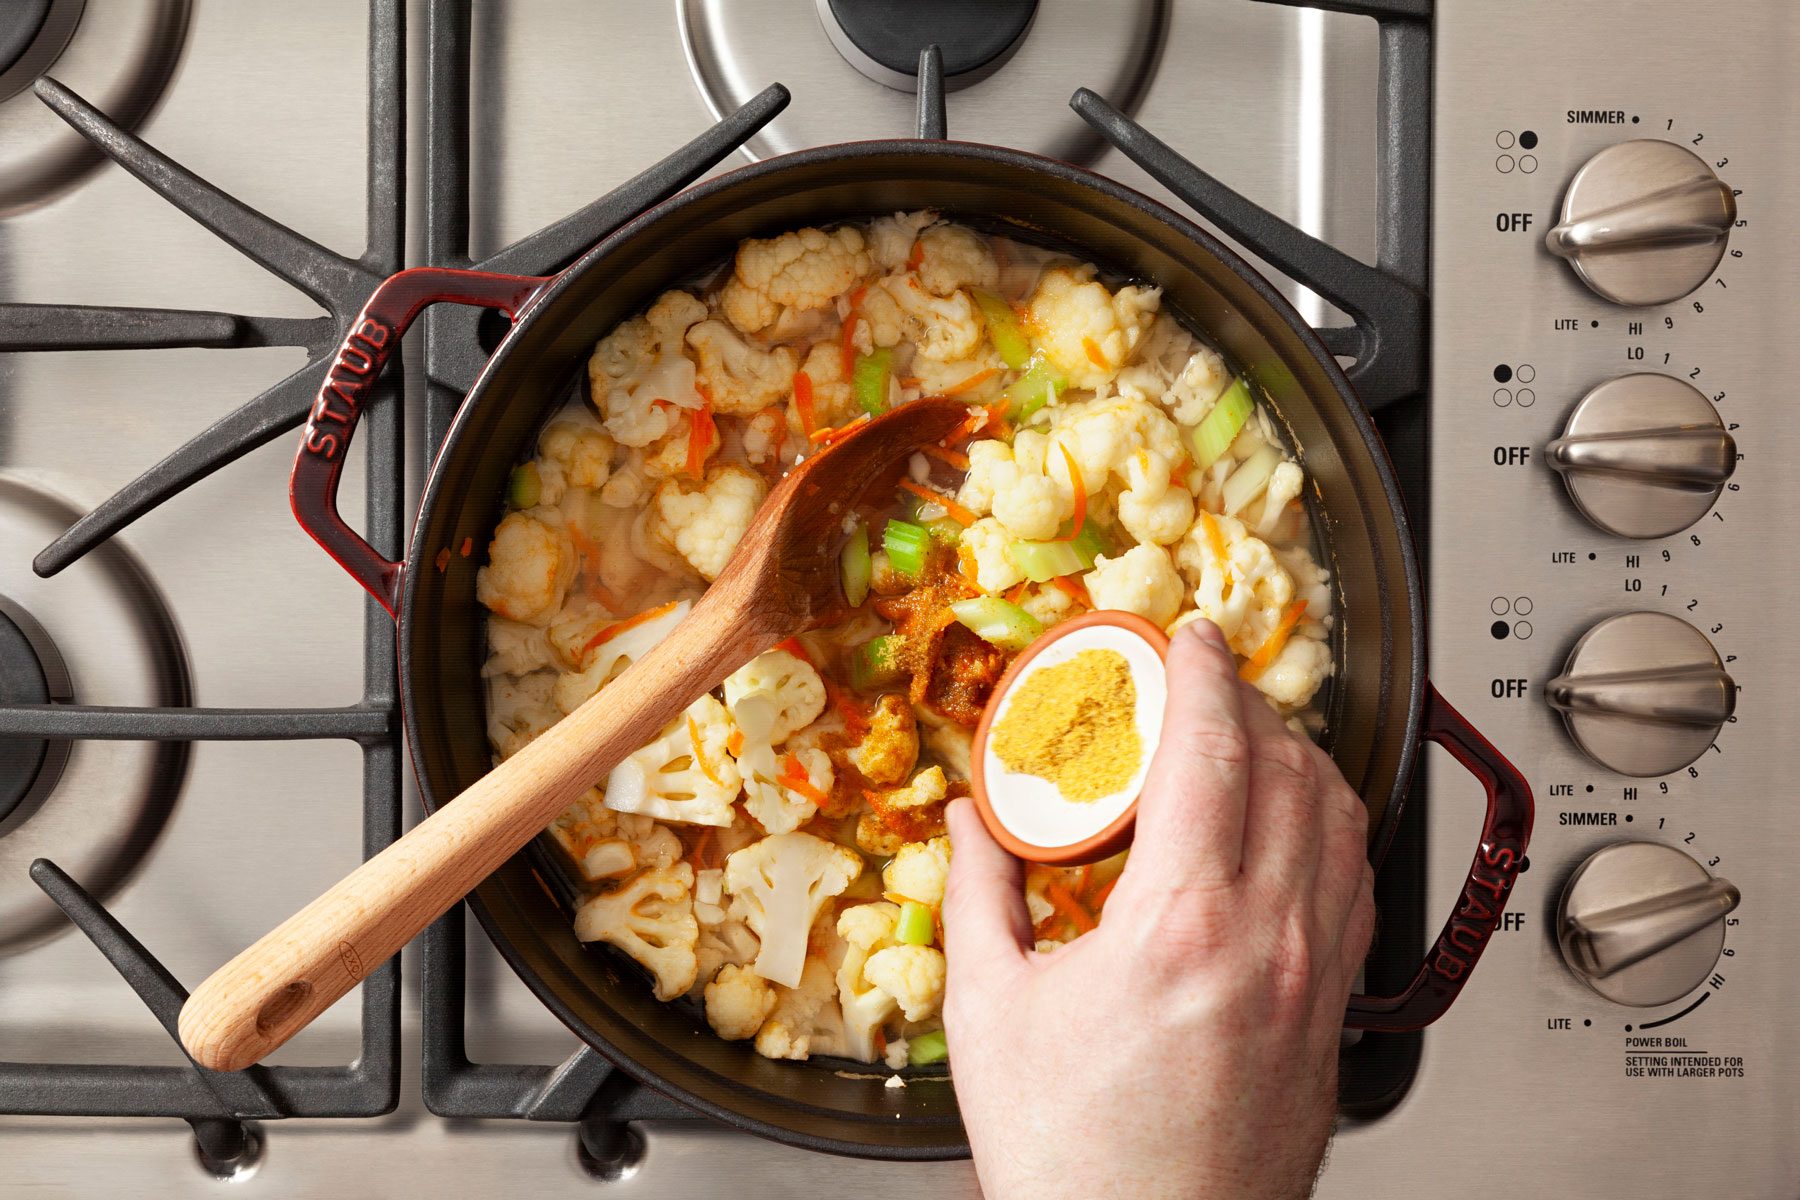 Boiling the cauliflower, carrot, celery in a large dutch oven